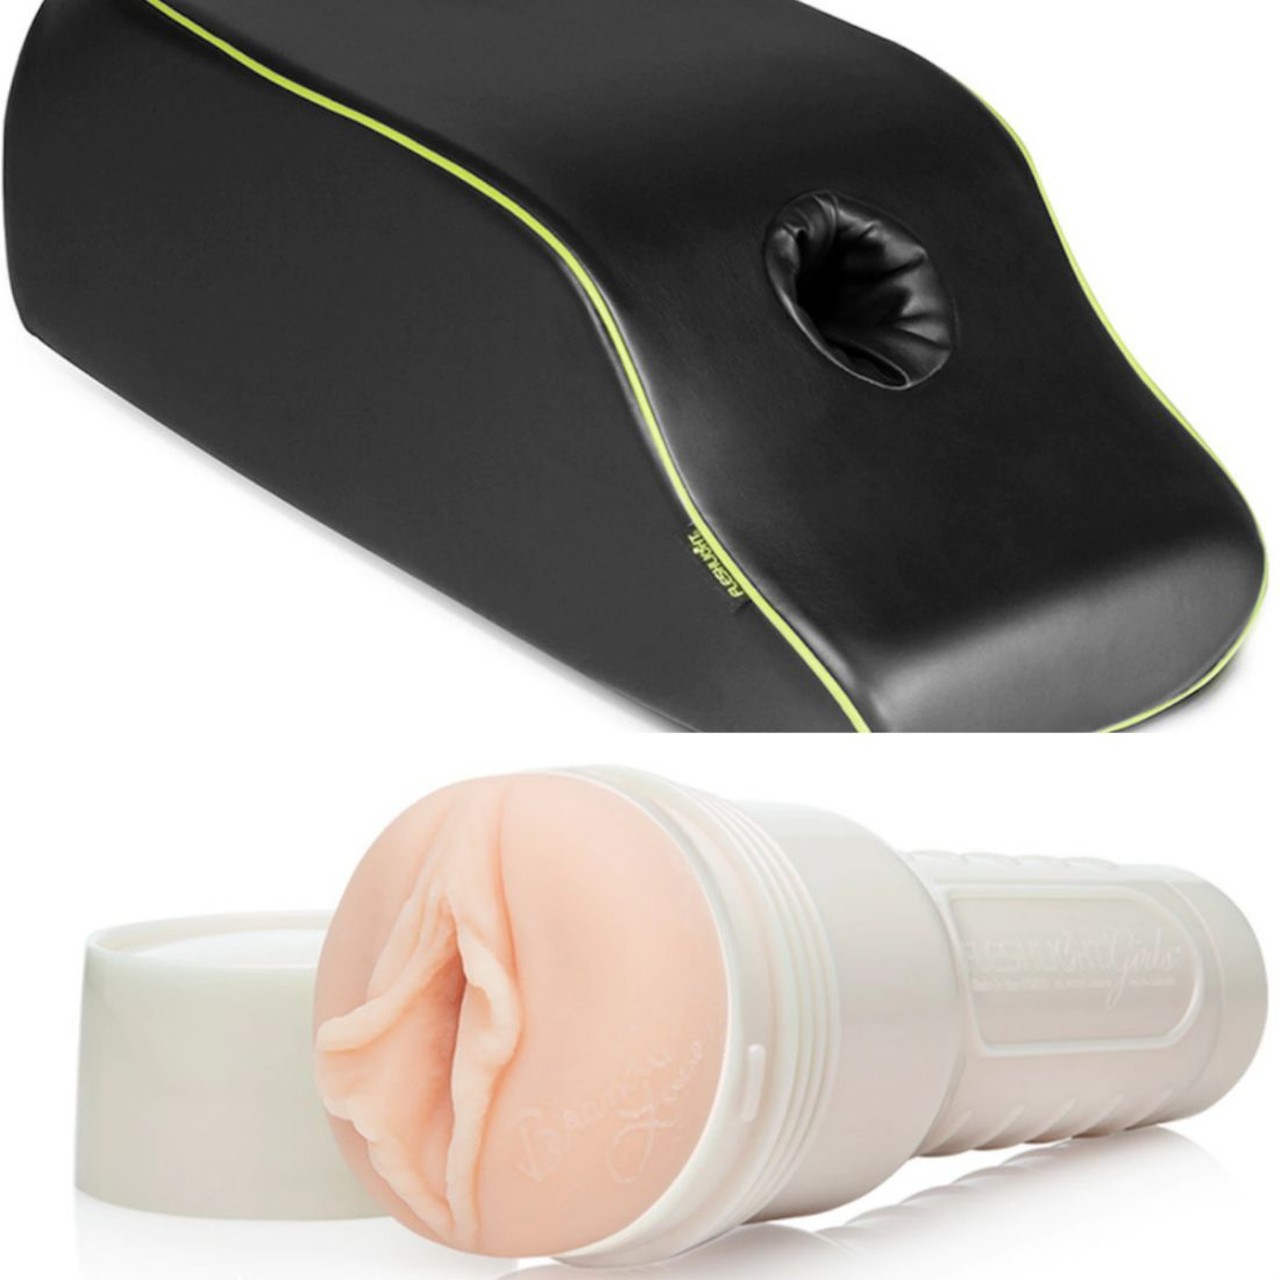 For those who want to take their Fleshlight to the next level
Fleshlight on a Mission Mount by Liberator, $175
Fleshlight Girls Brandi Love Heartthrob, $79
Cirilla's, various locations; cirillas.com 
The Fleshlight is a classic masturbation toy for a reason, and it's time for the negative stigma to stop. As one of the most joked-about tools, the Fleshlight is a pleasure maker for the ultimate pleasure seeker. The Fleshlight on a Mission Mount by Liberator takes Fleshlight use to new levels and angles for a more realistic and hands-free thrust sesh for your penis. Made with firm and supportive foam, the On a Mission positions the Fleshlight at the perfect angle to simulate sex with a partner or create a comfy way to deliver some oral while you go to town with your Fleshlight friend. 
Photo via  cirillas.com